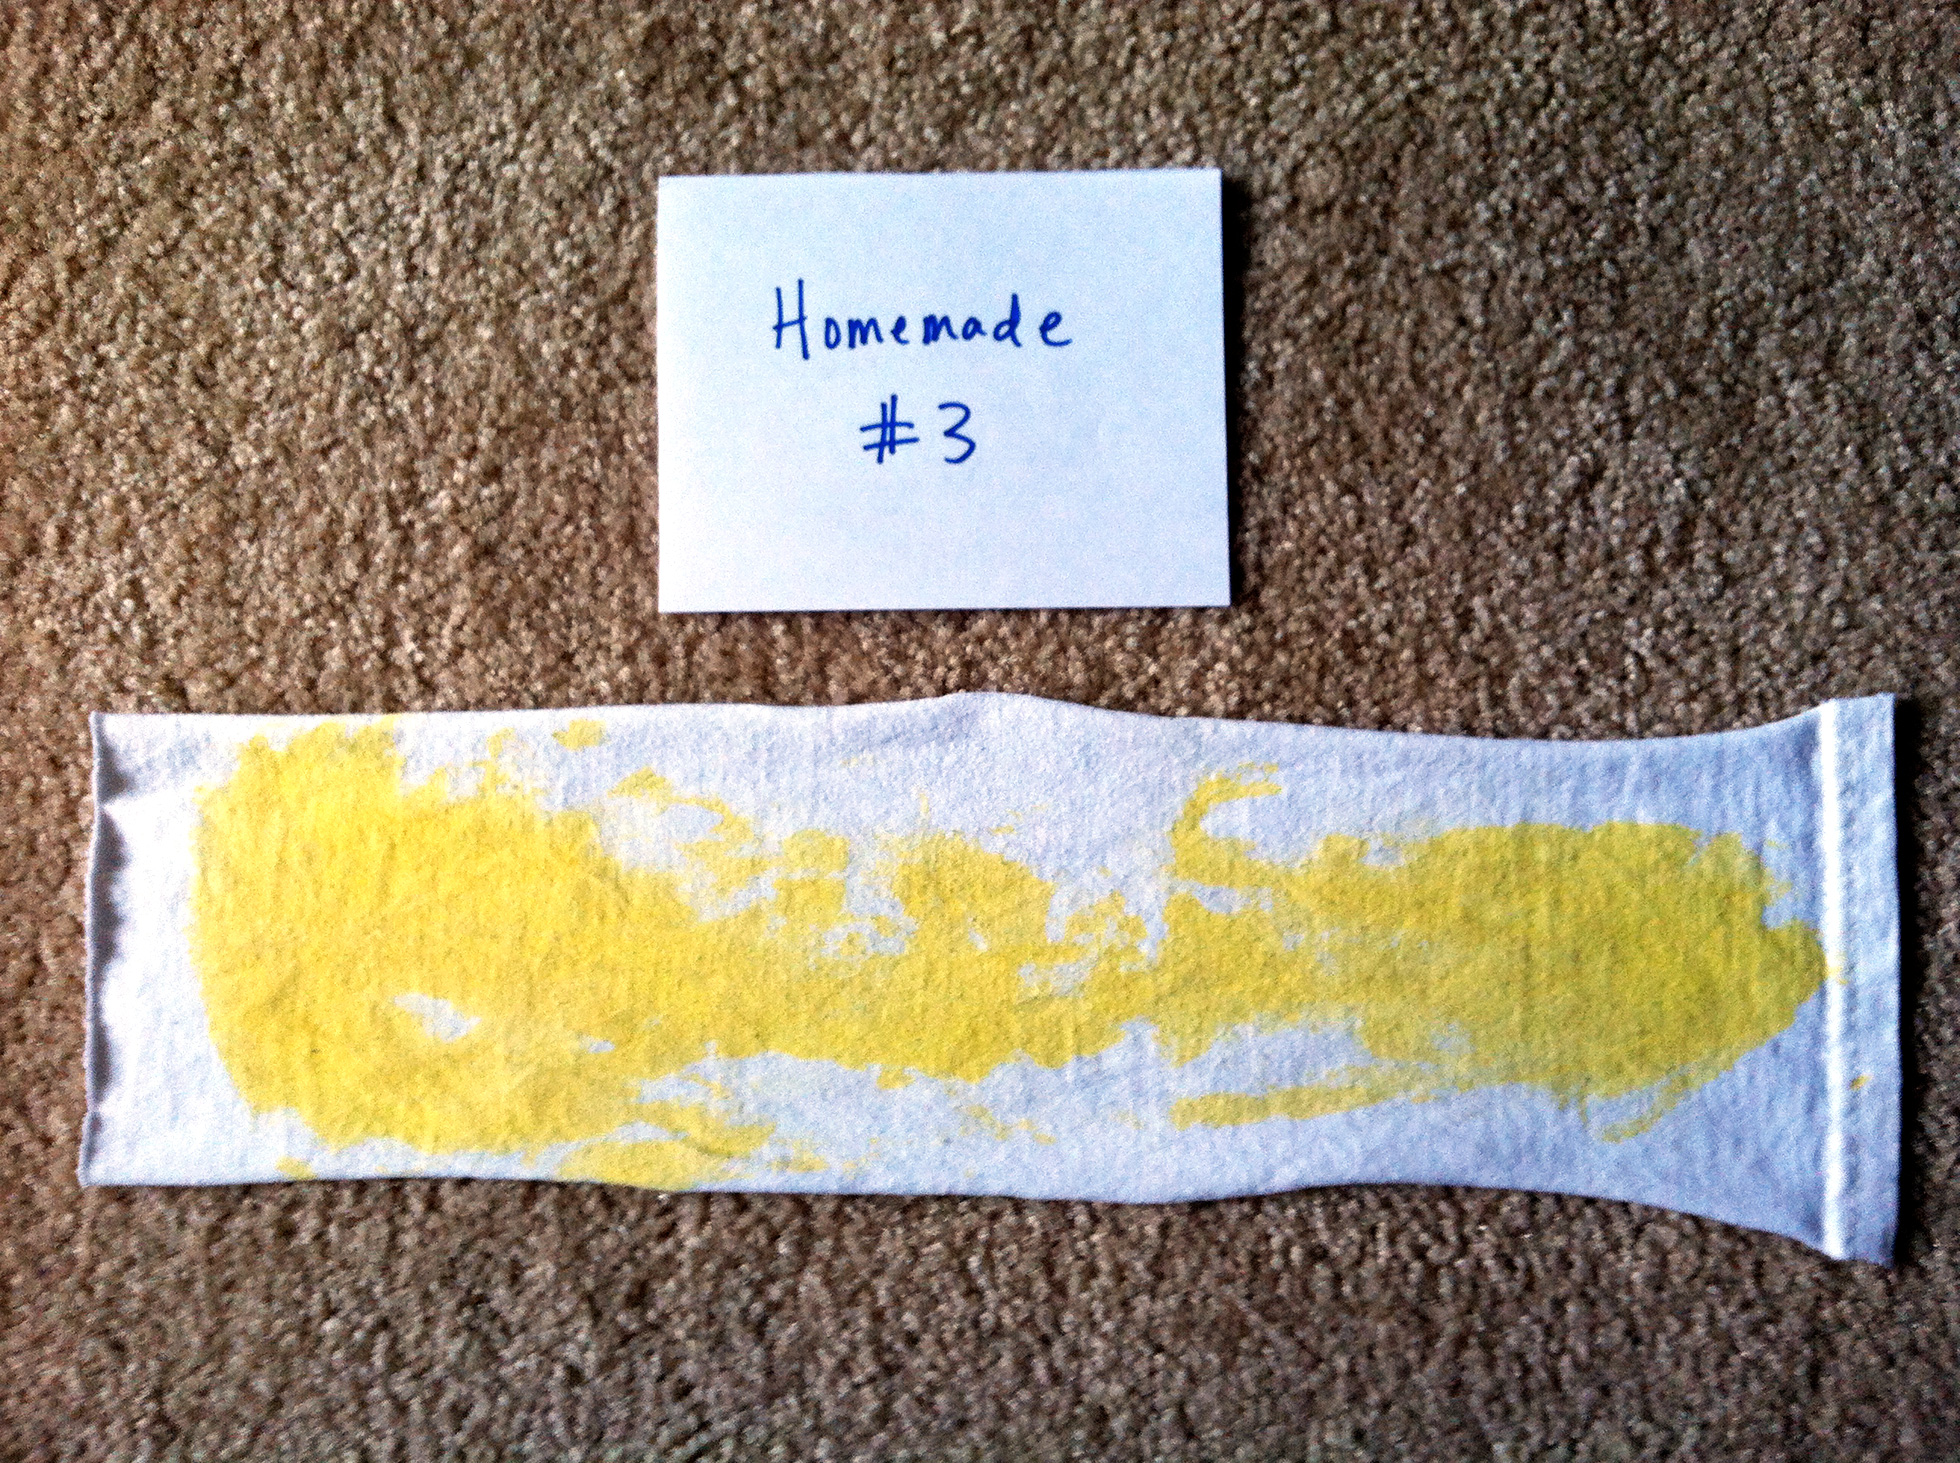 Test strip after washing with homemade detergent #3